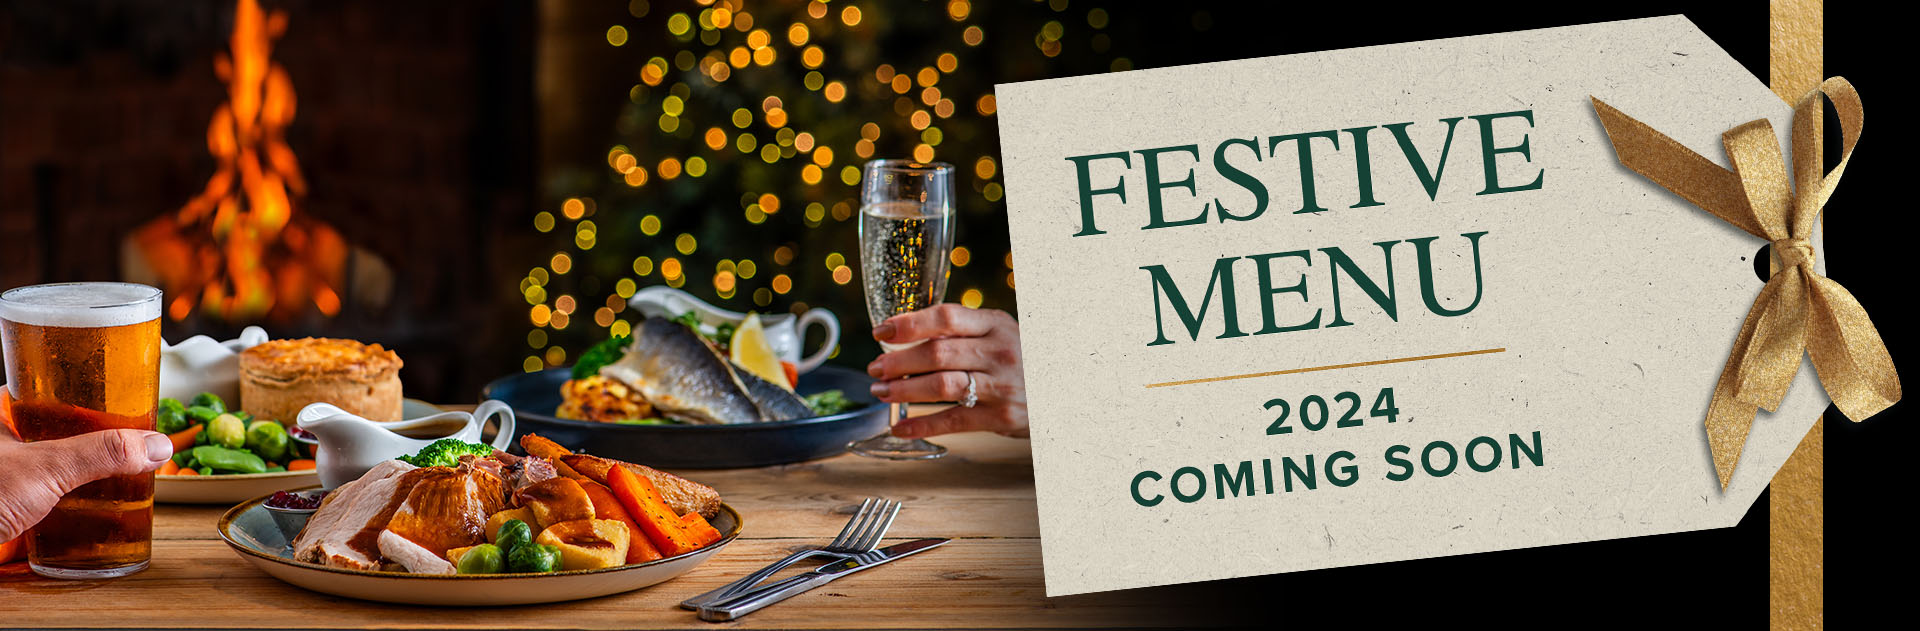 Festive Menu at The Beaufort Arms 